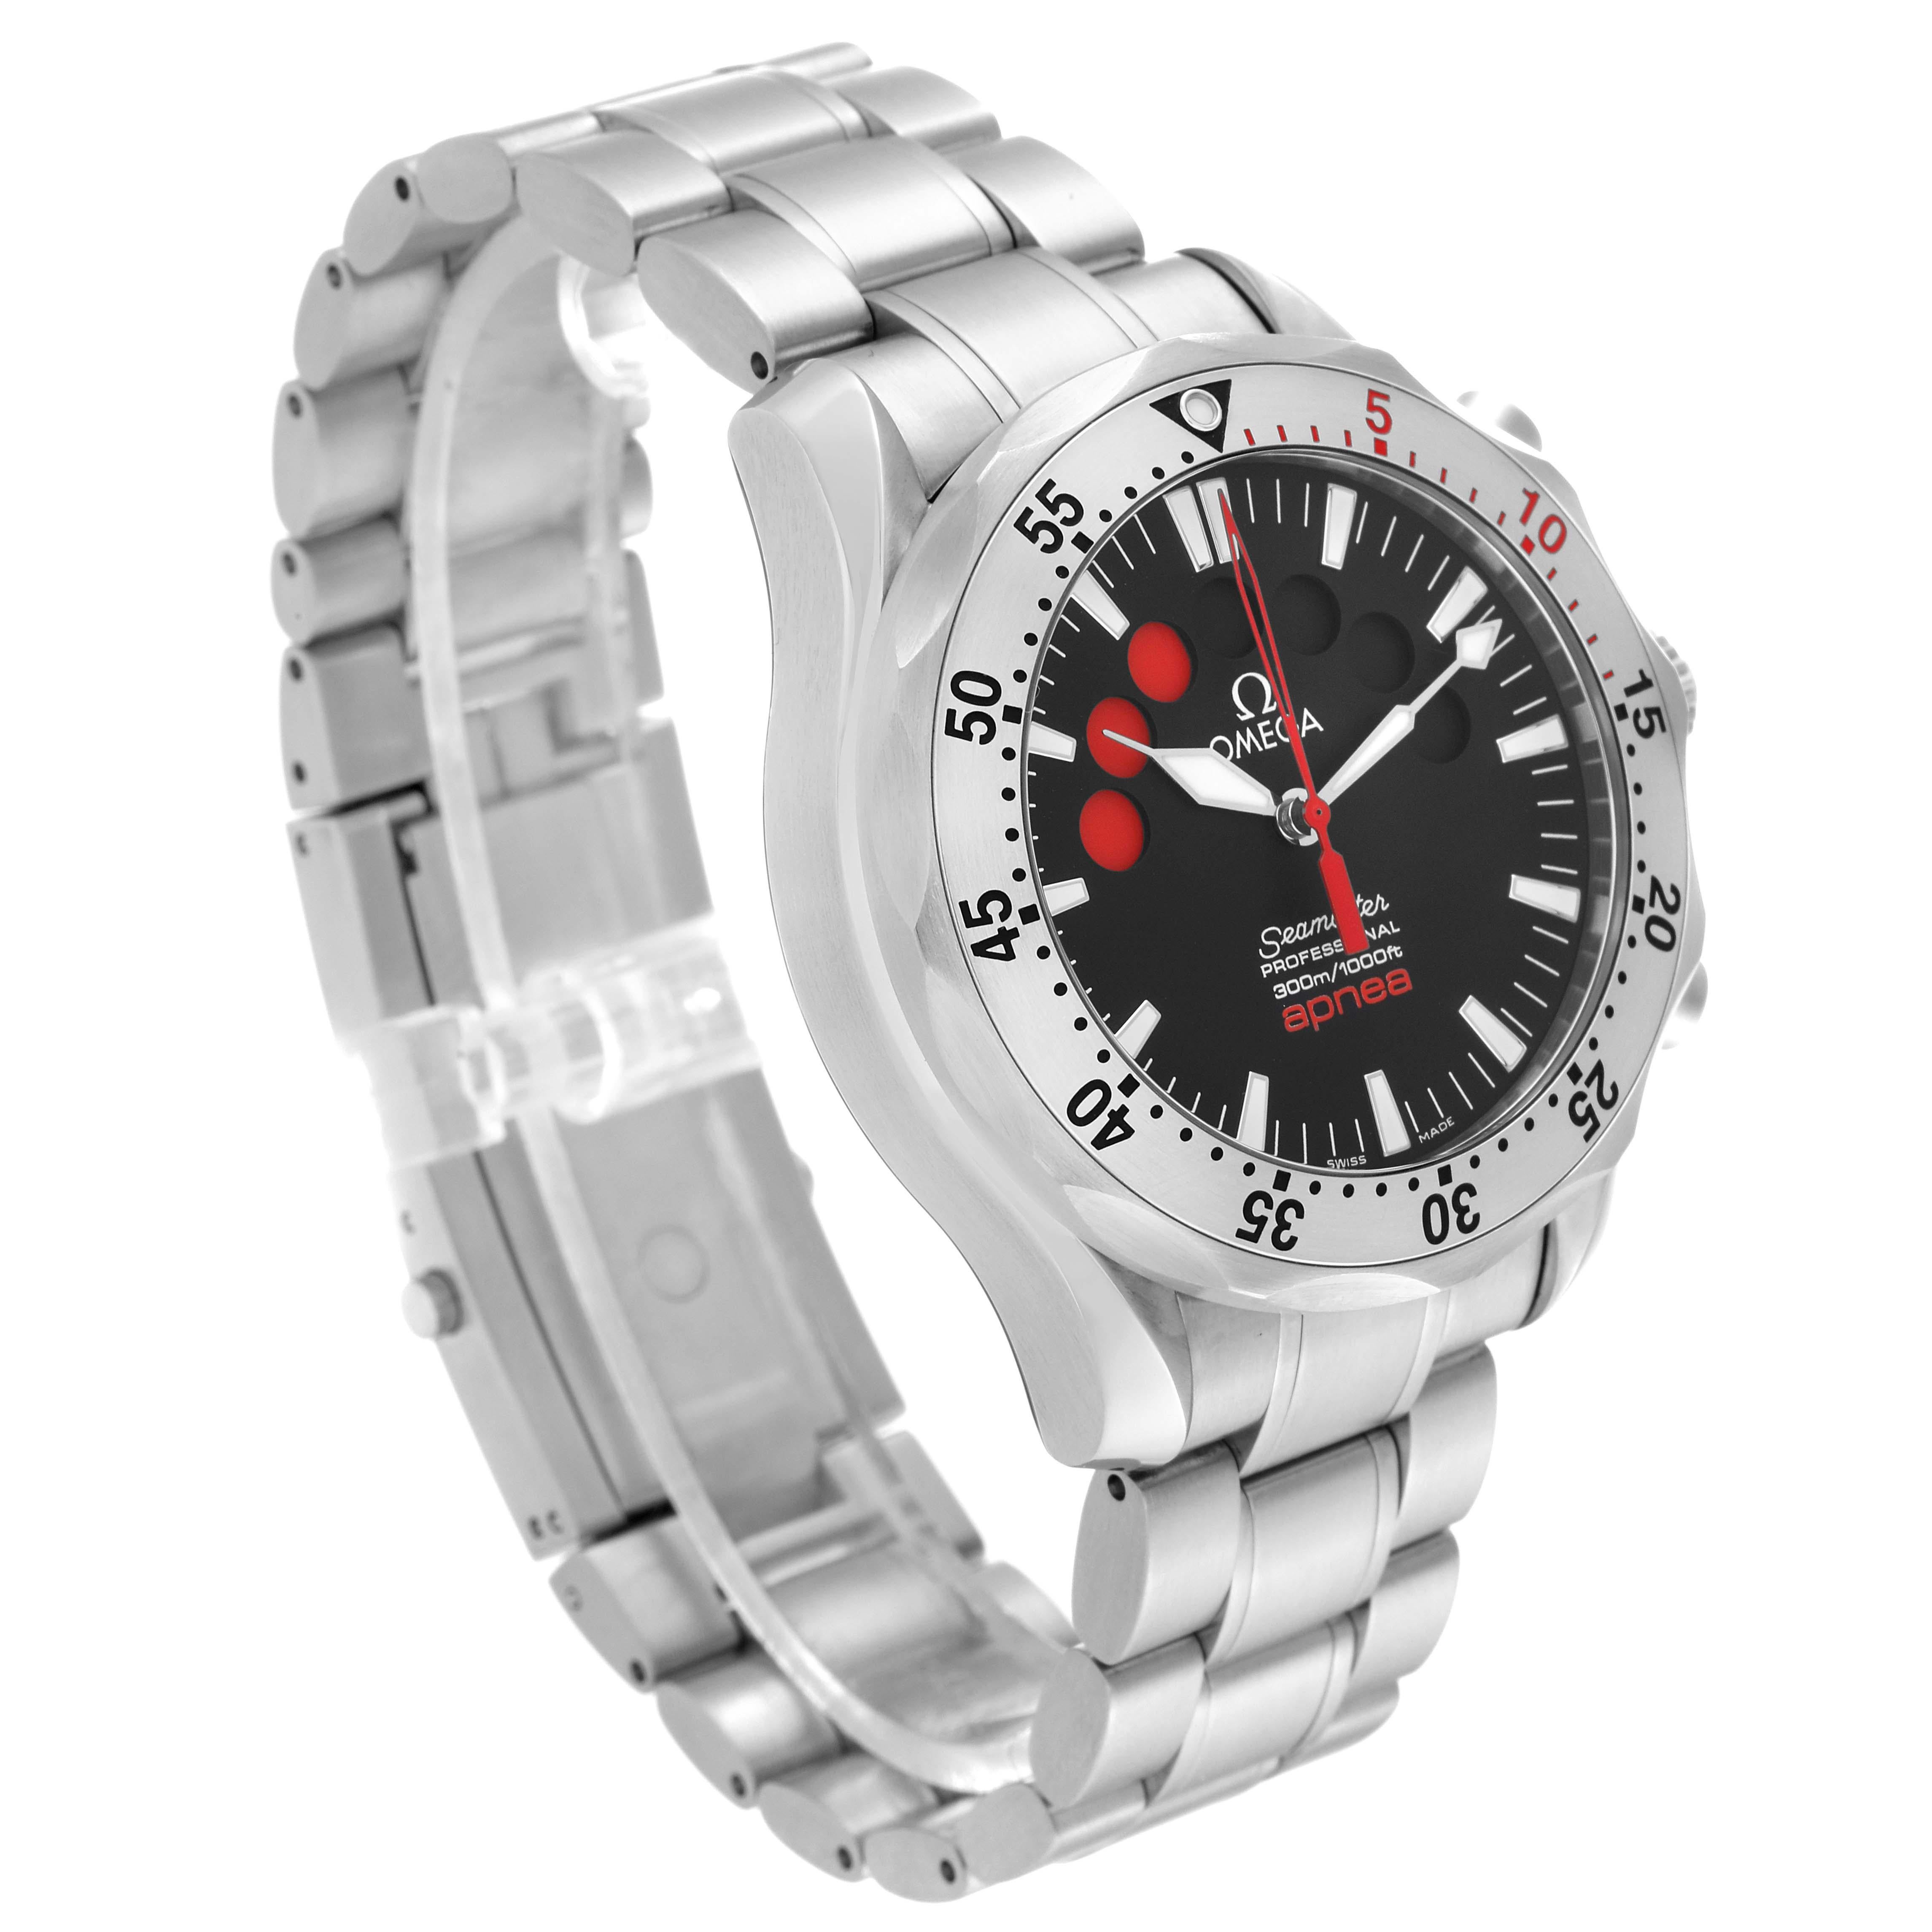 Omega Seamaster Apnea Jacques Mayol Steel Mens Watch 2595.50.00 Box Card For Sale 1